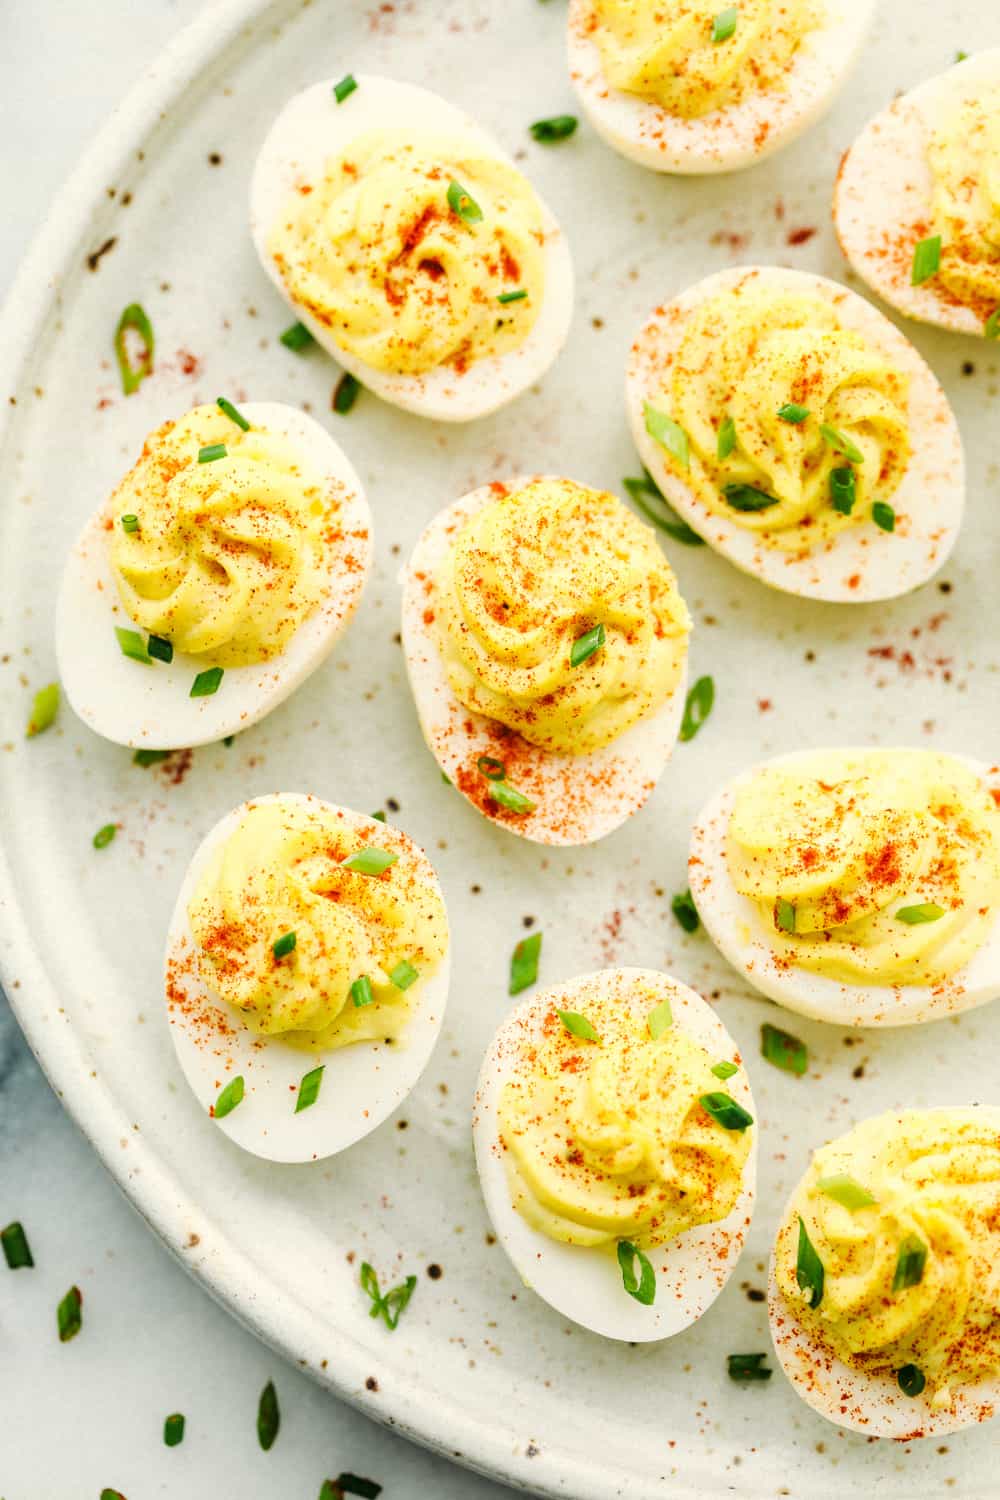 Deviled eggs on a plate with paprika sprinkled on top.